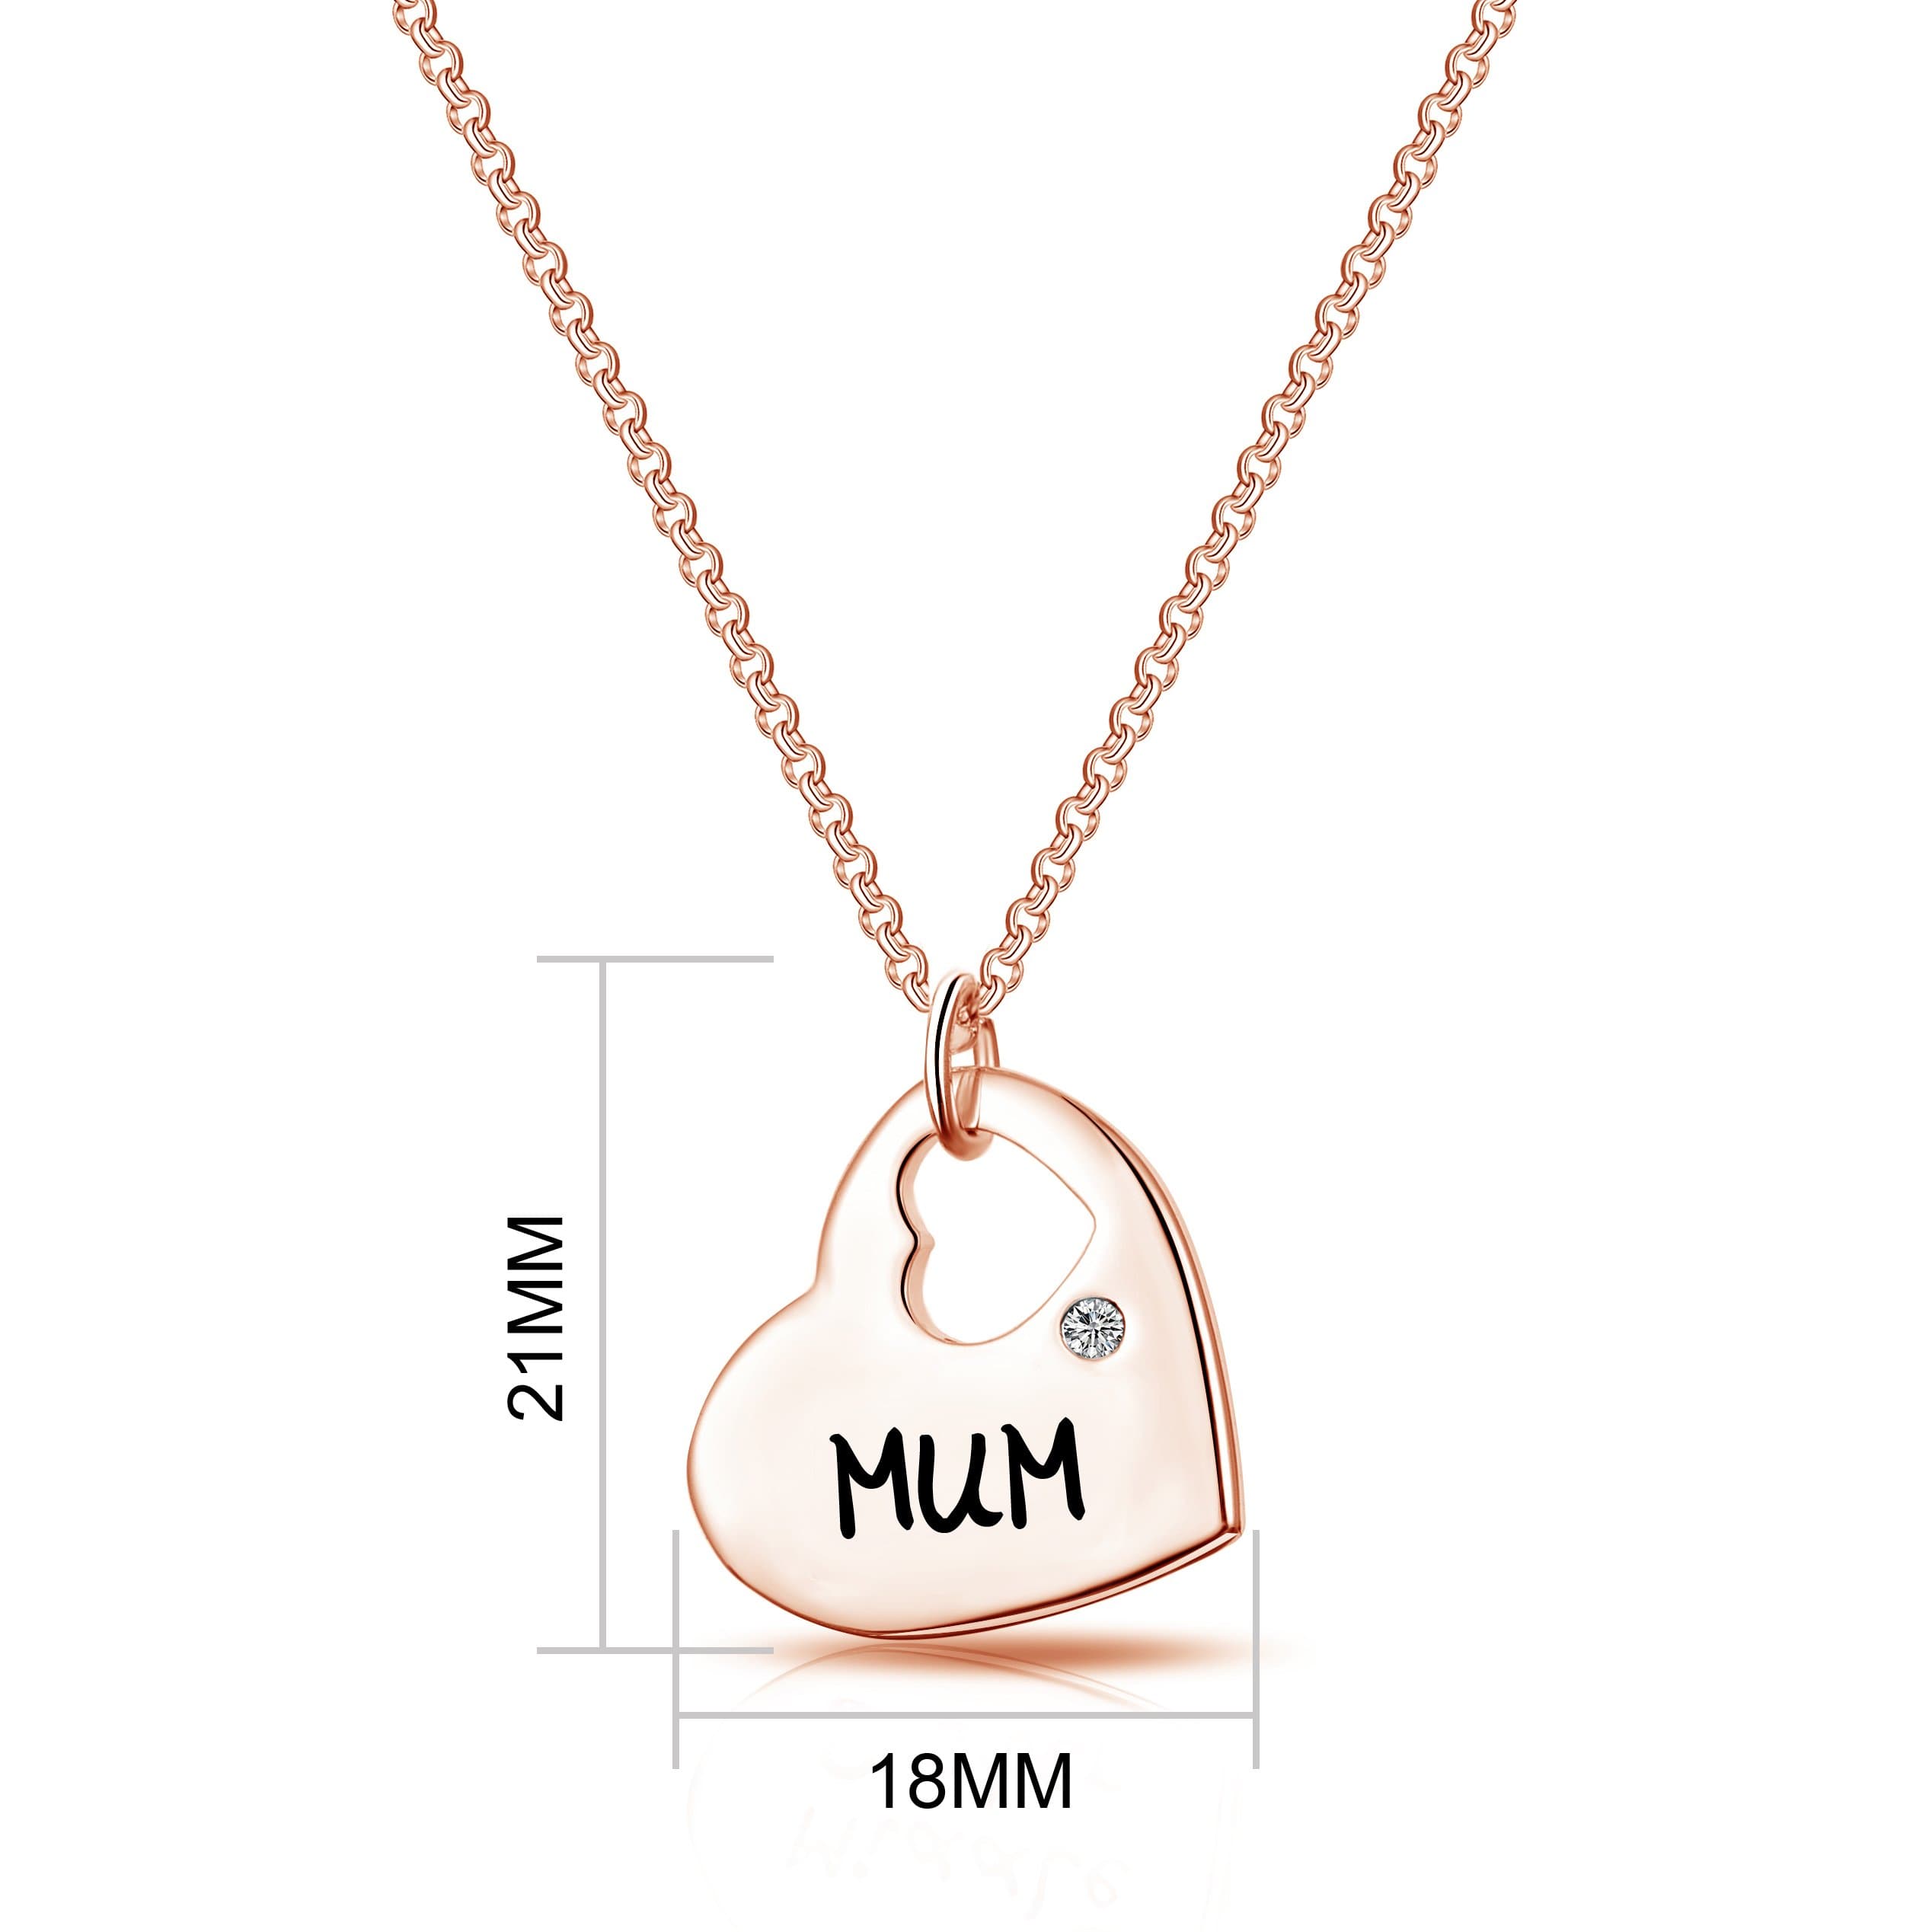 Rose Gold Plated Mum and Daughter Quote Heart Necklace Created with Zircondia® Crystals